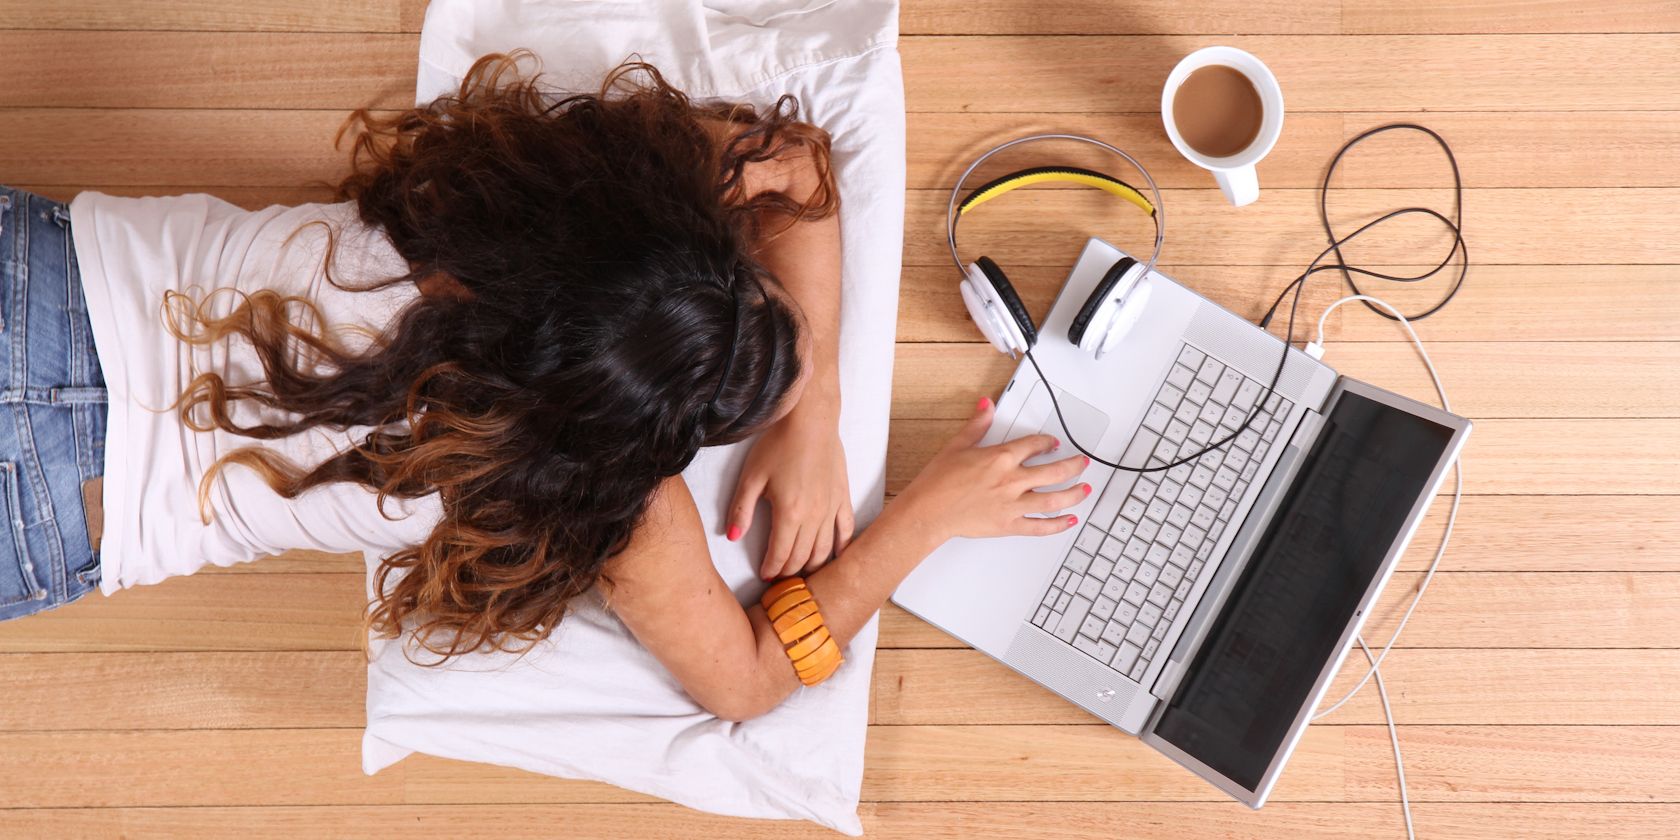 woman lying on floor using laptop while it charges